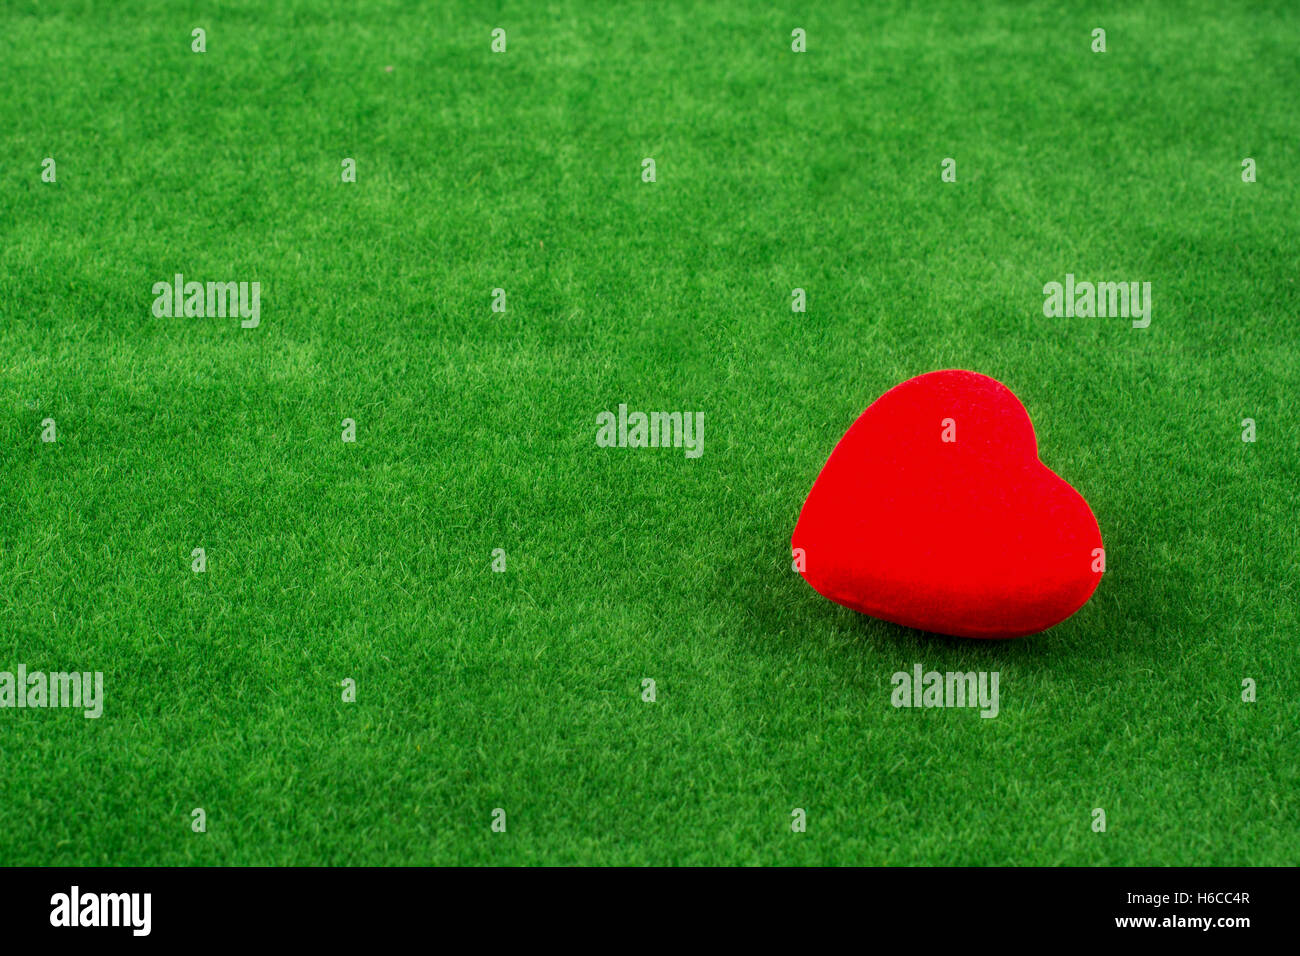 Red heart shape icon on fake green grass Stock Photo